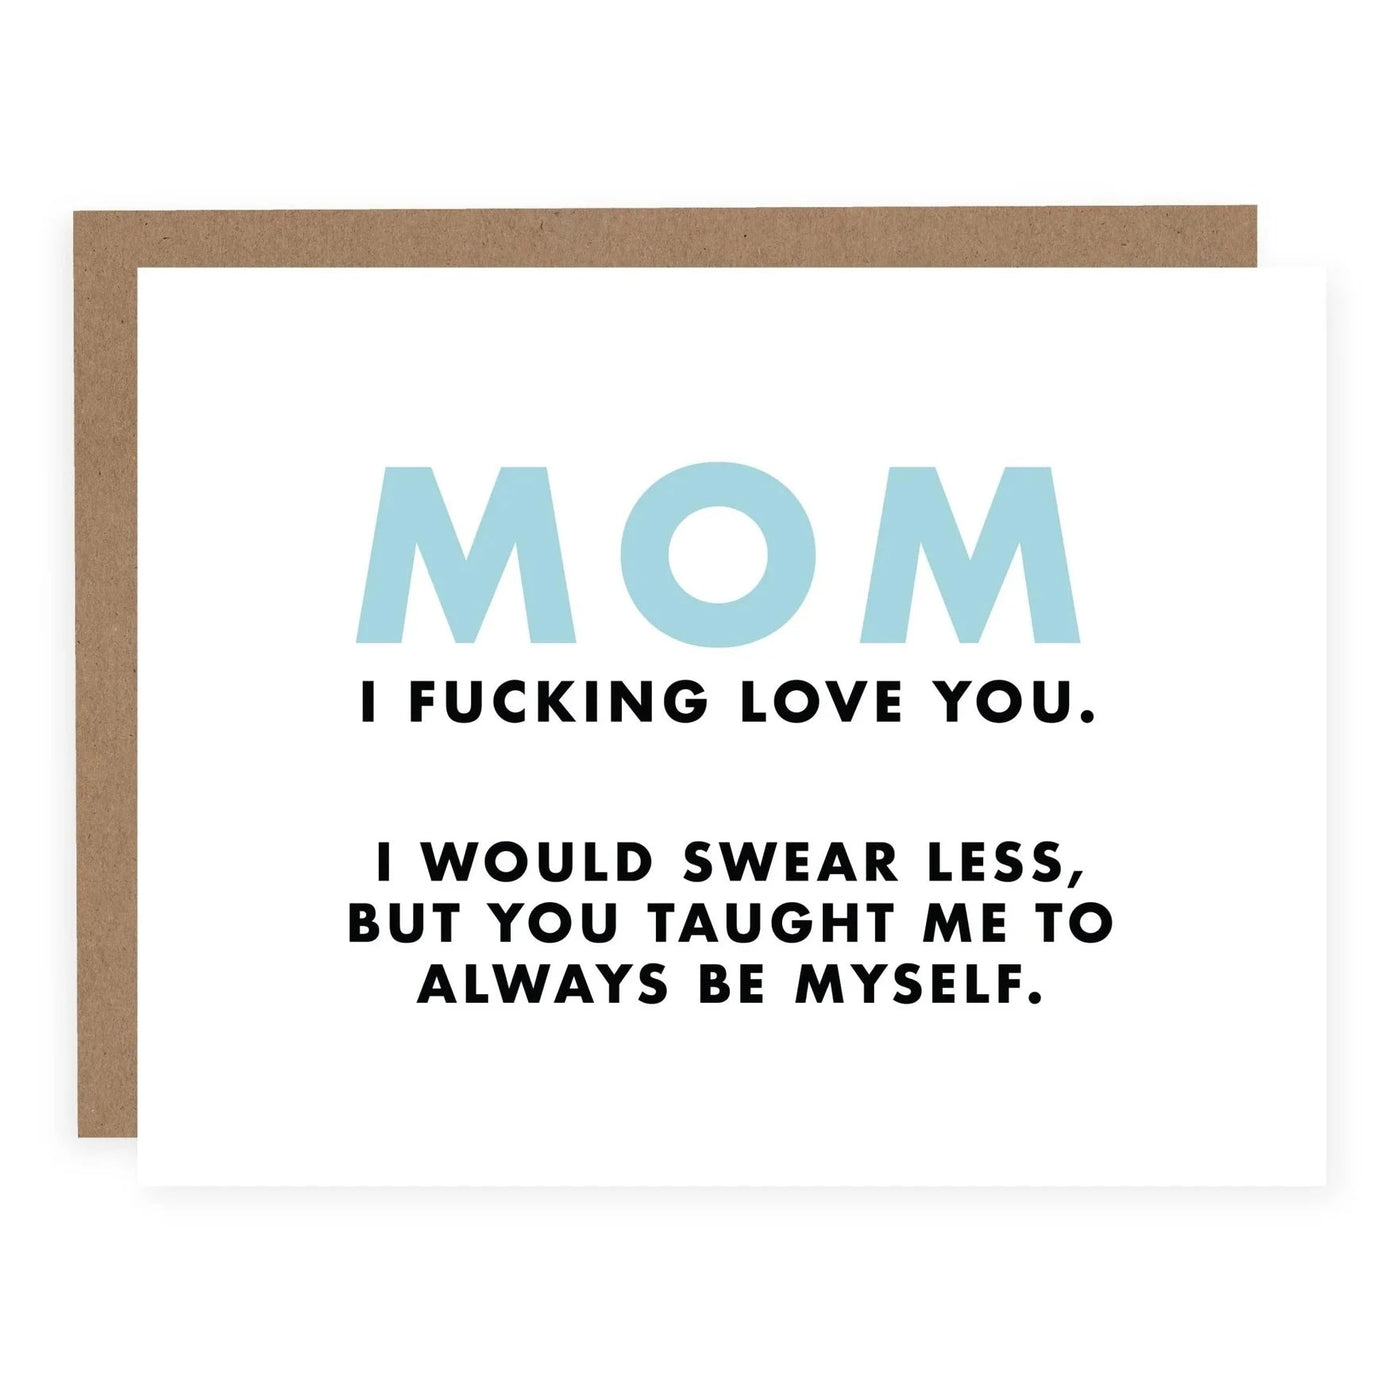 Pretty By Her | Mom I Fucking Love You Greeting Card, The Local Space, Local Canadian Brands